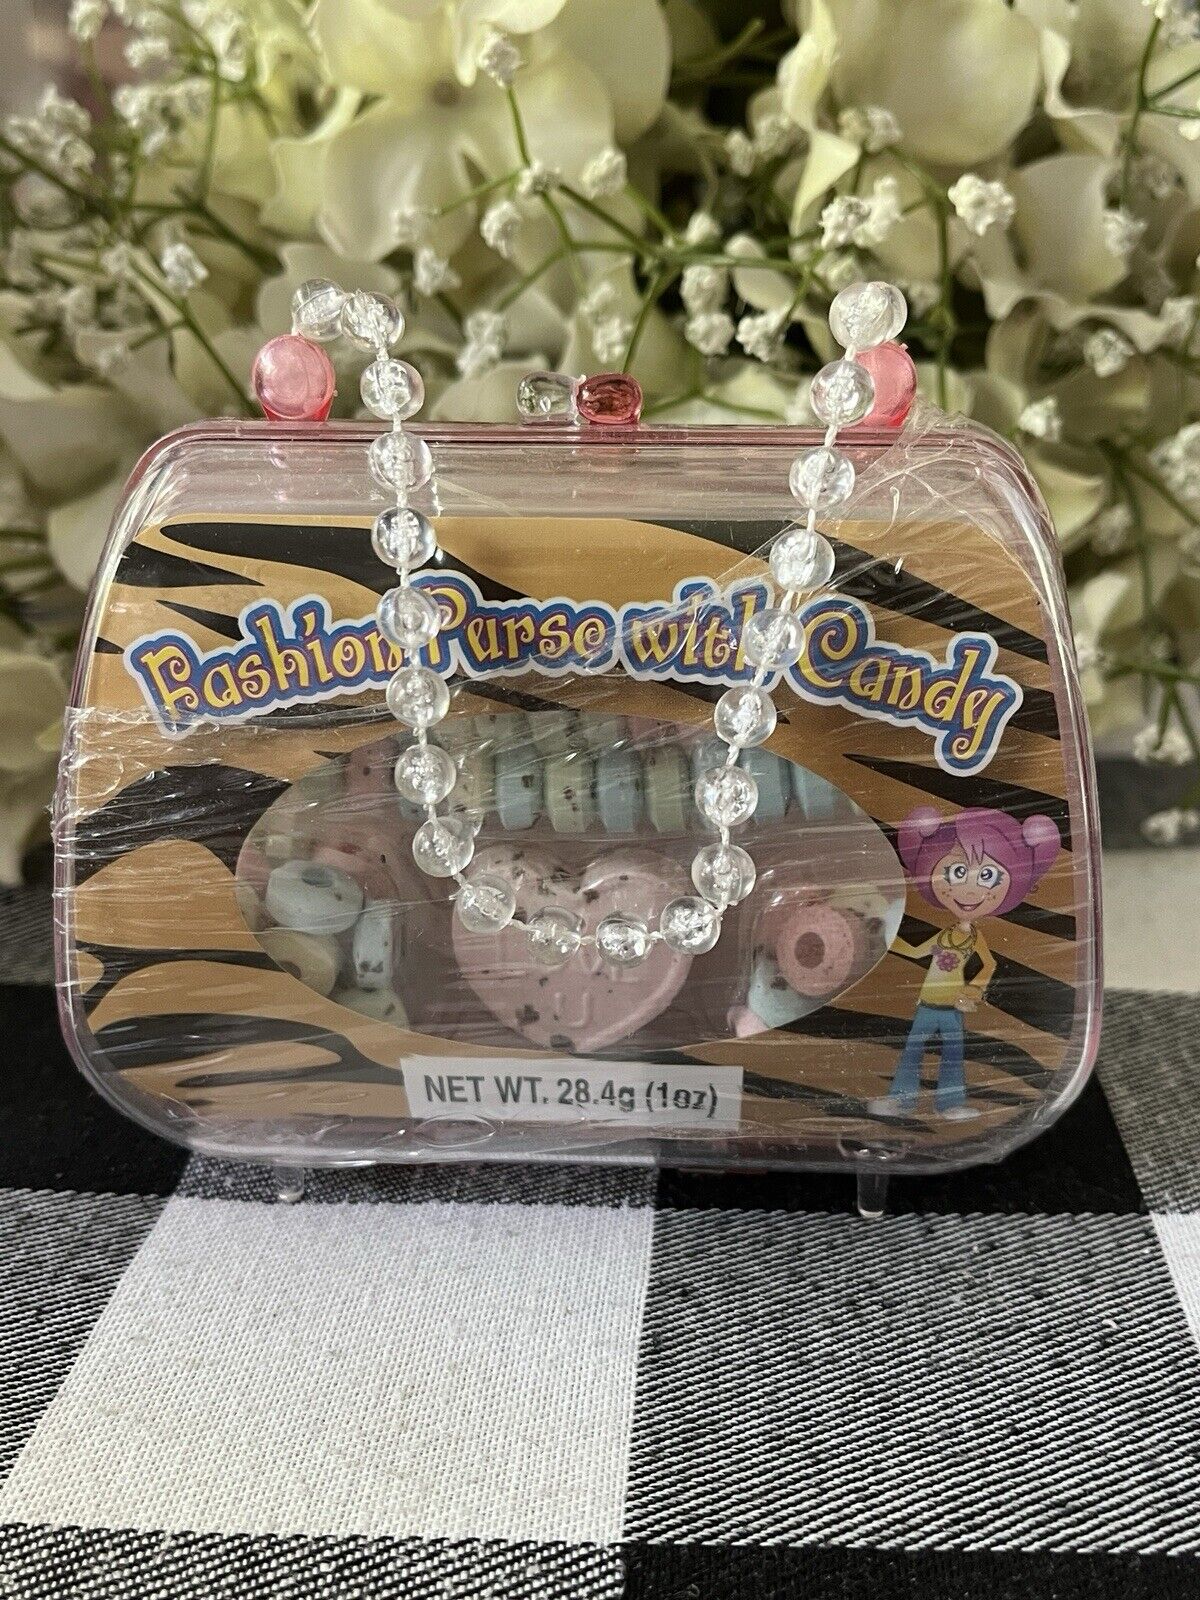 Fashion Purse with Candy Vintage candy toy 2012 Collectible